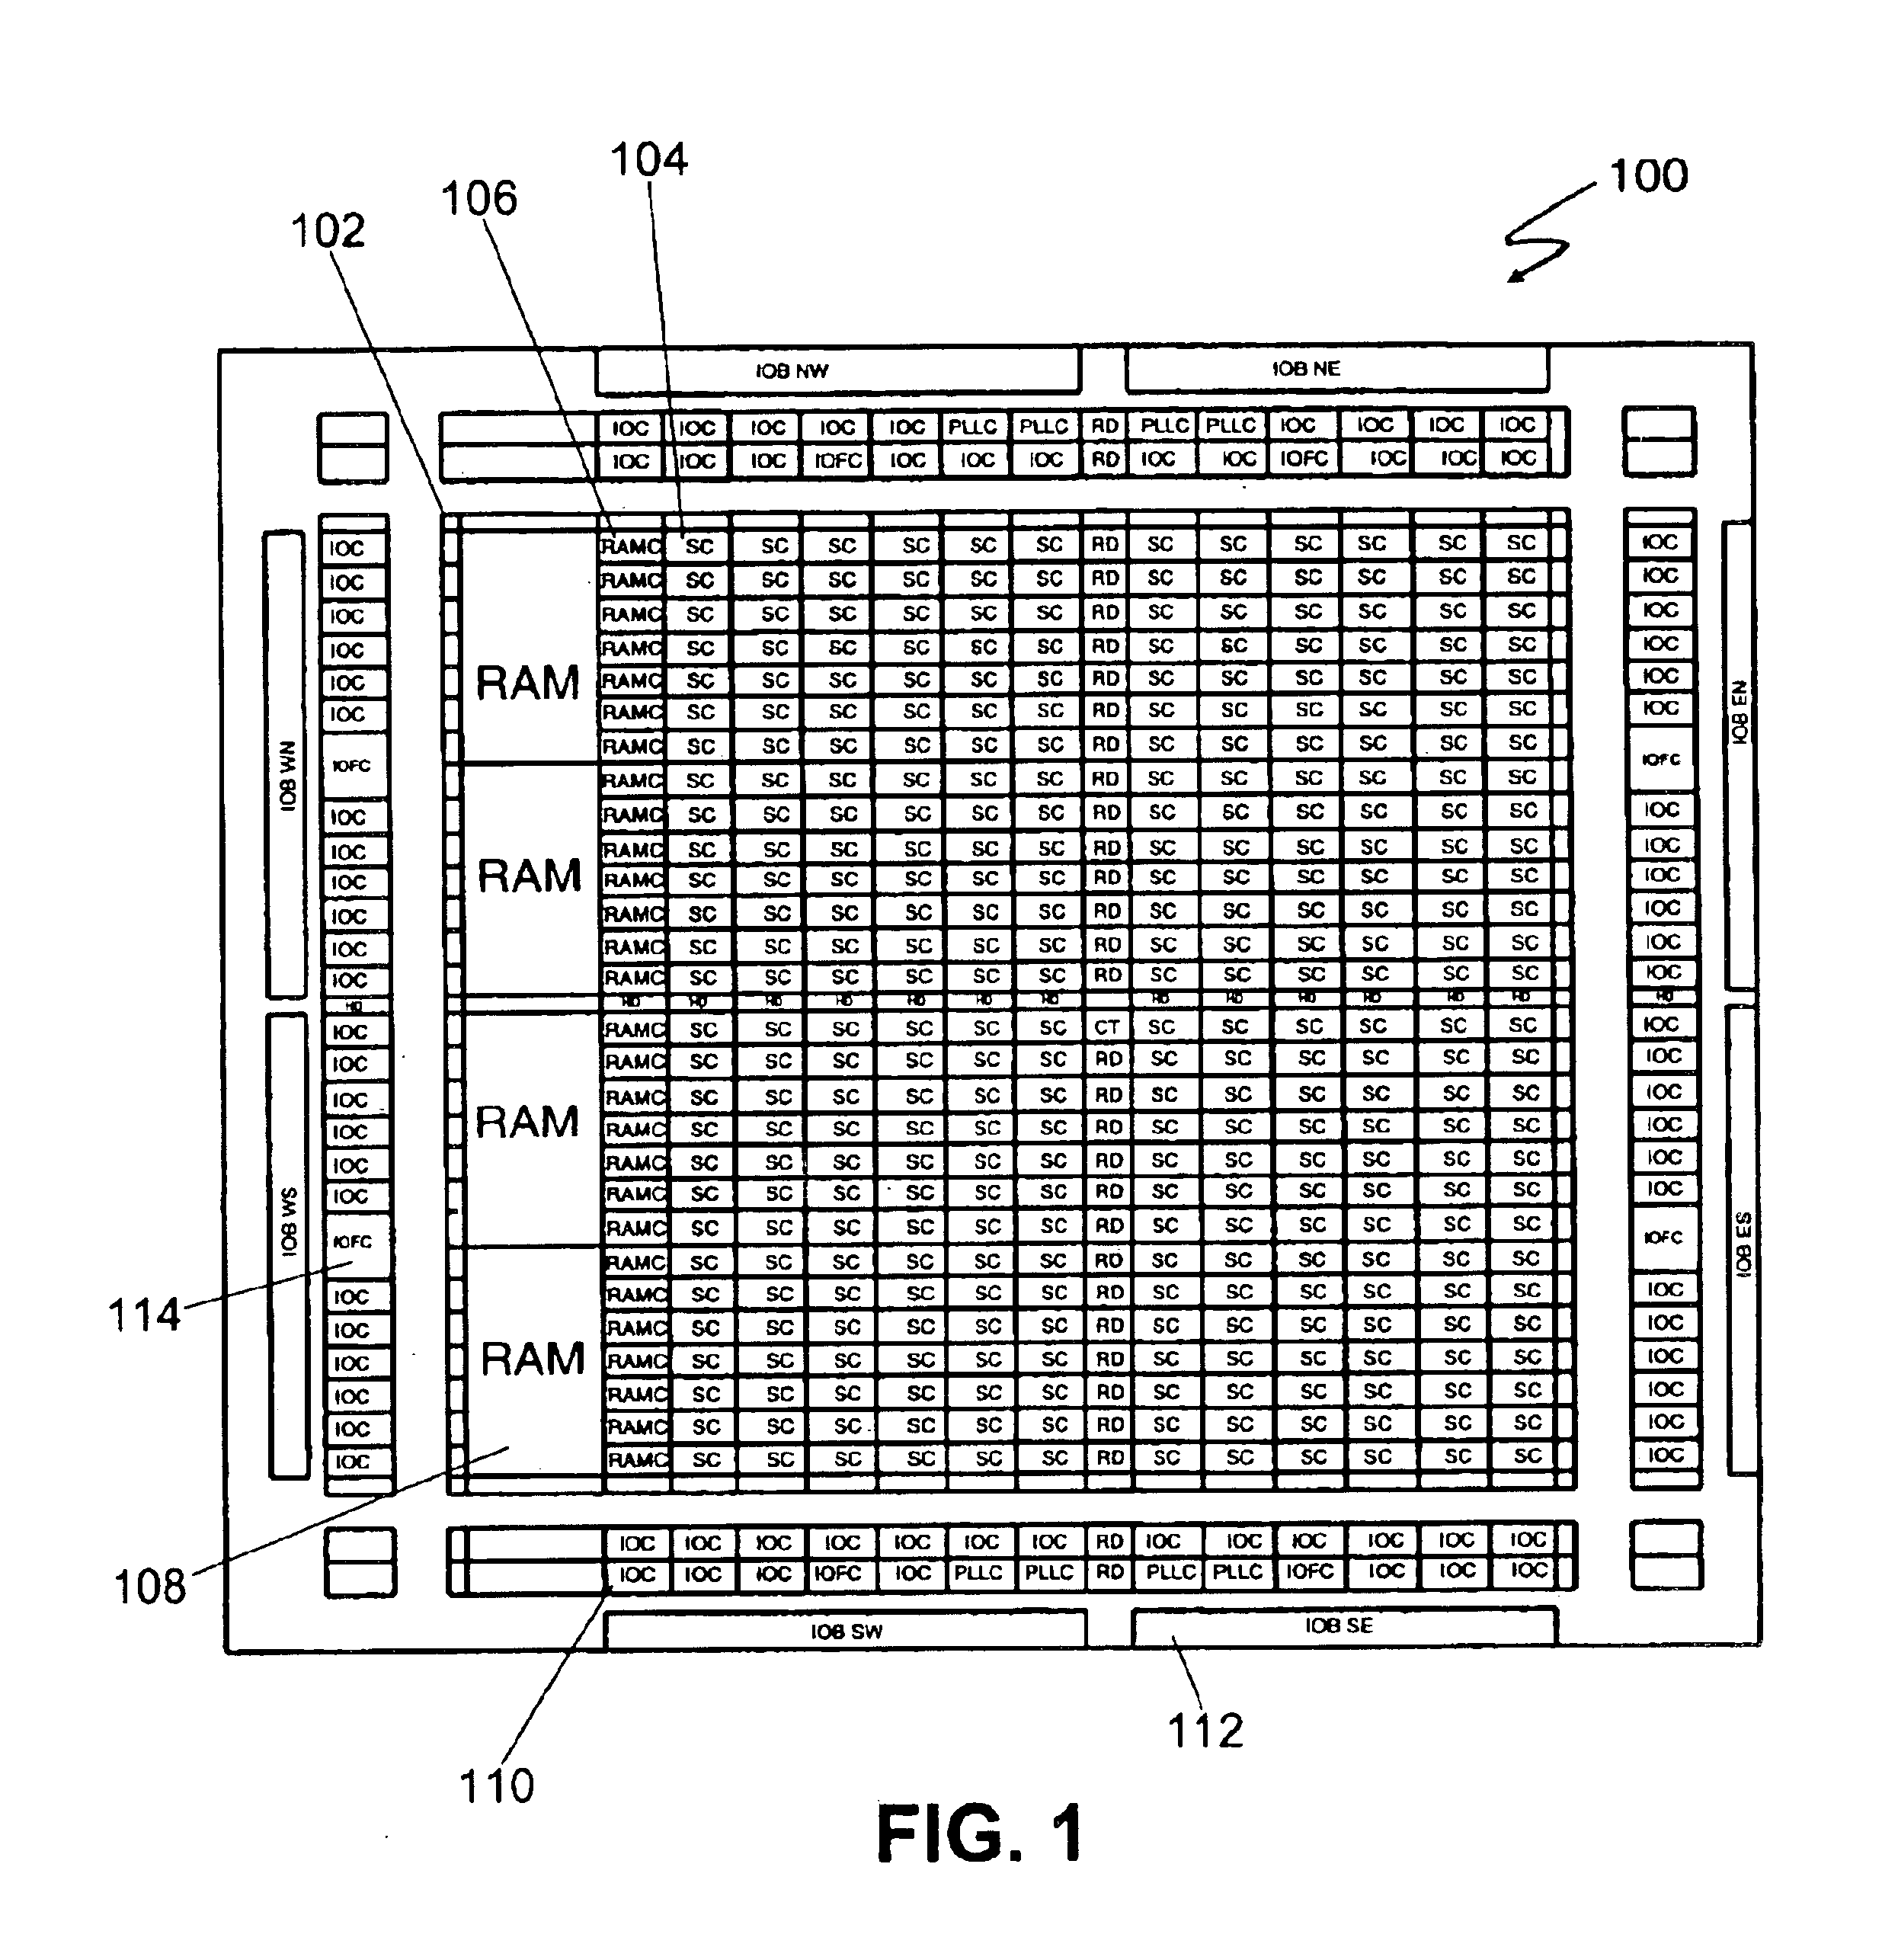 Synchronous first-in/first-out block memory for a field programmable gate array